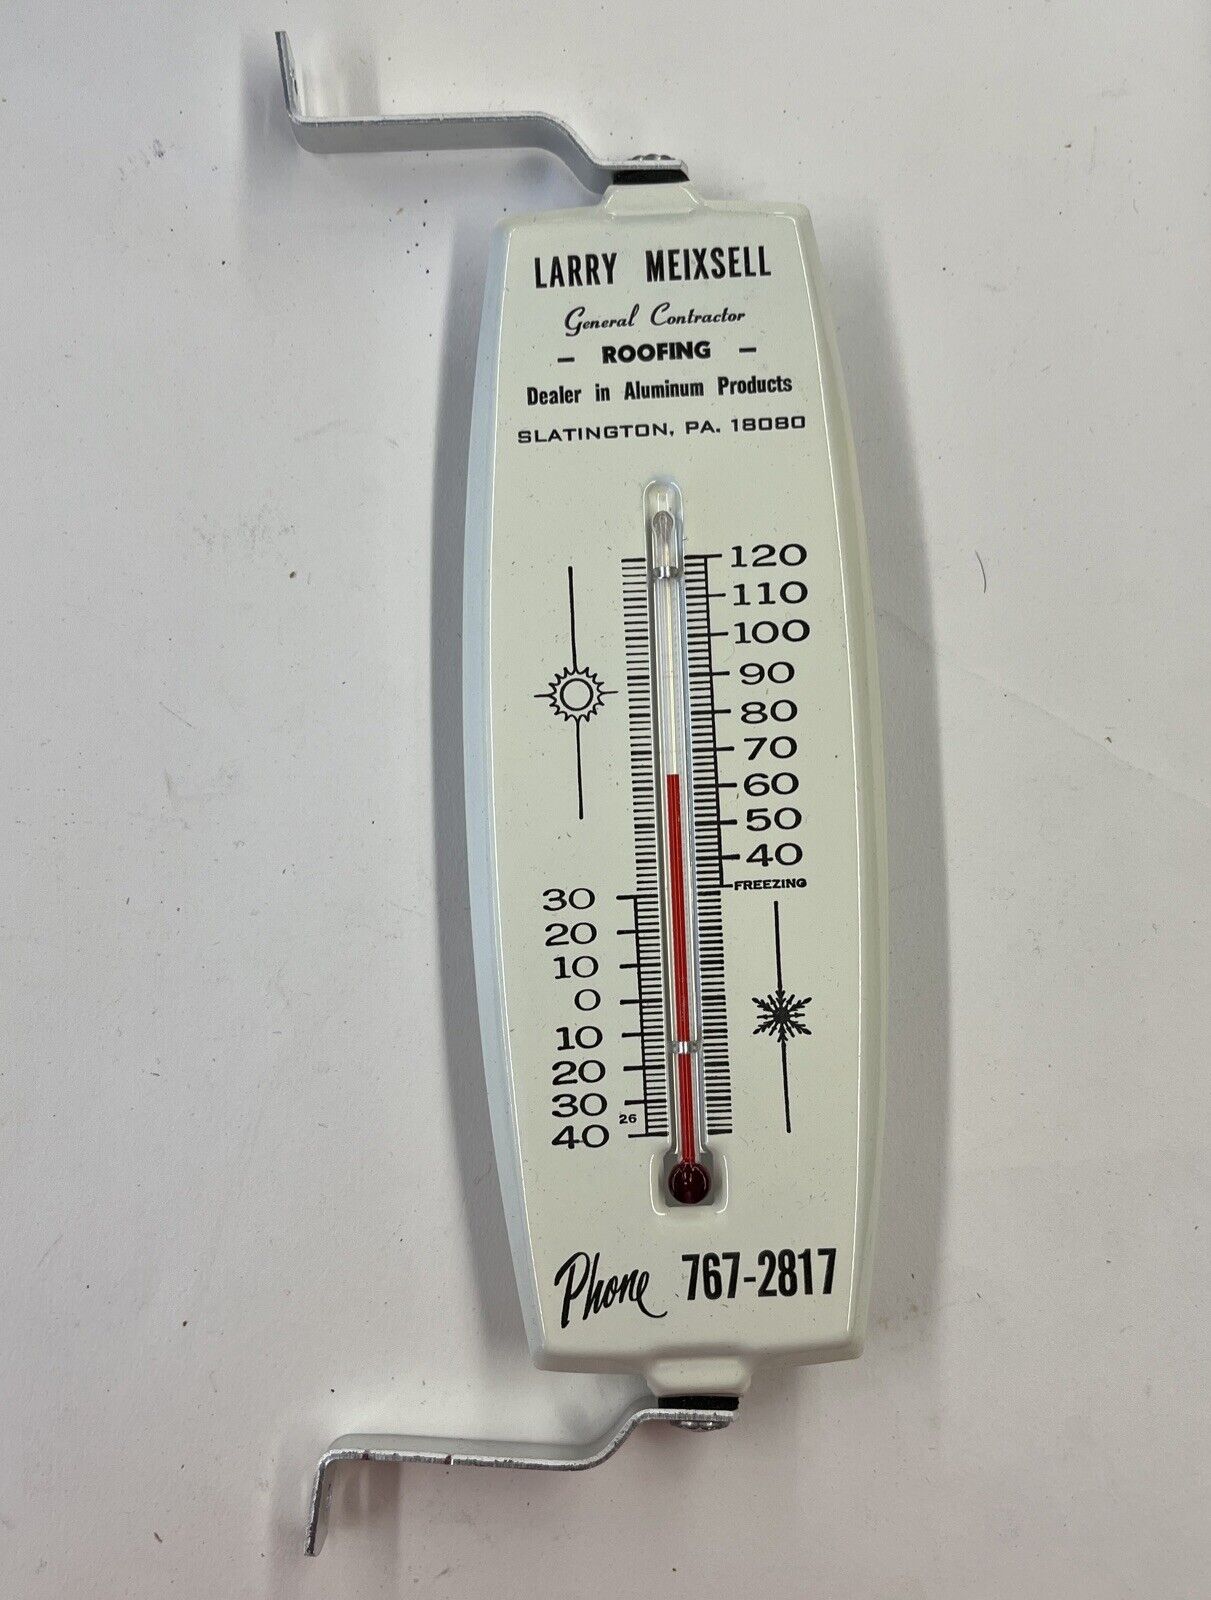 Outdoor Thermometer Larry Meixsell General Contractor Roofing in Slatington PA